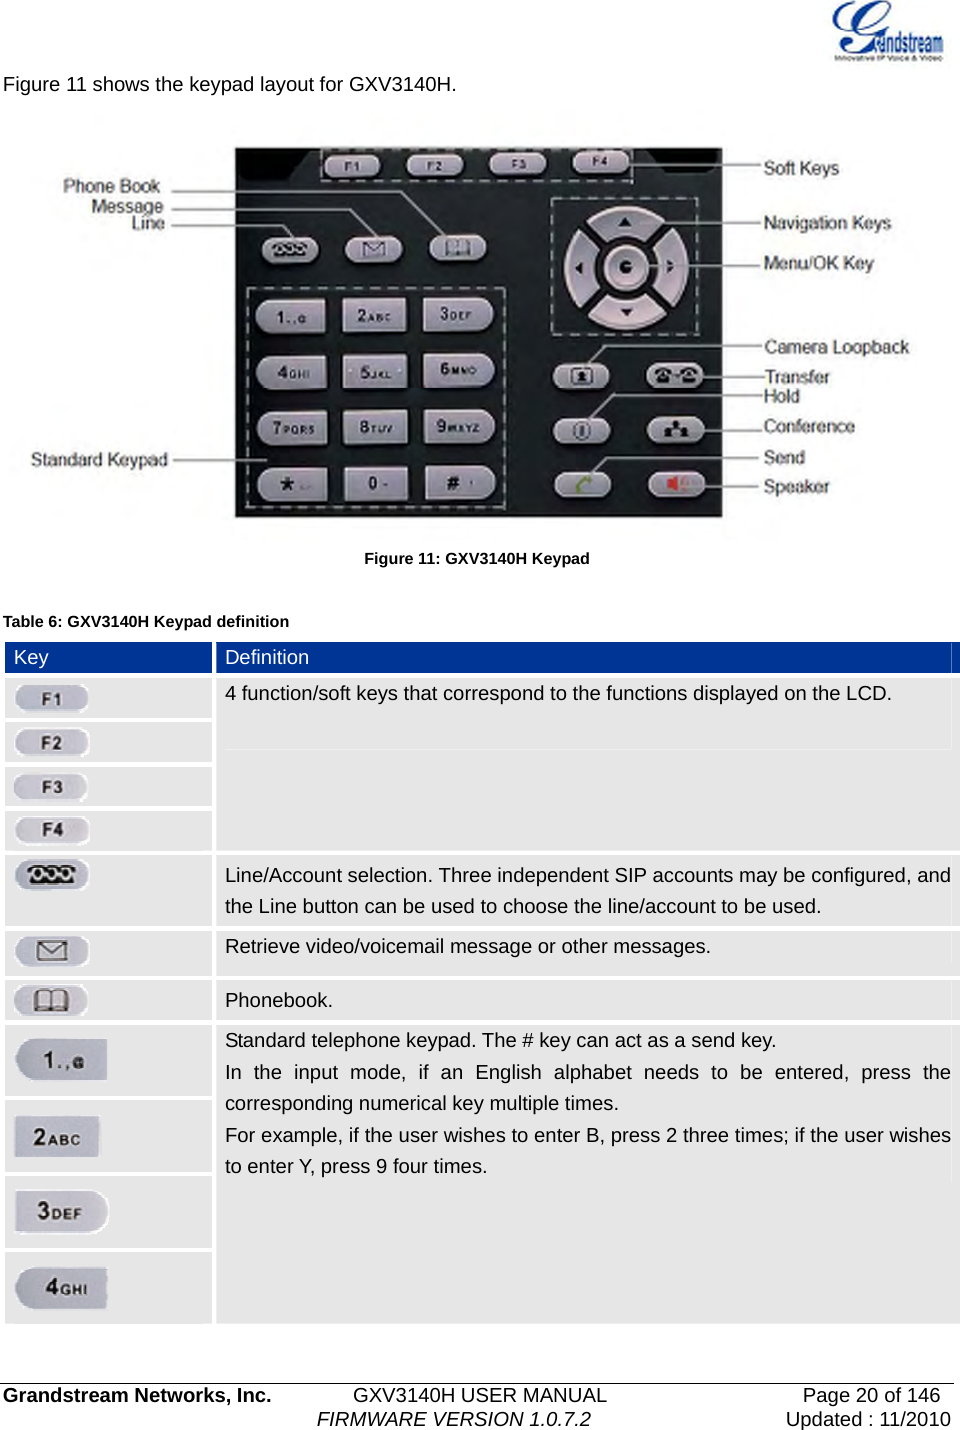   Grandstream Networks, Inc.        GXV3140H USER MANUAL                  Page 20 of 146                                FIRMWARE VERSION 1.0.7.2 Updated : 11/2010  Figure 11 shows the keypad layout for GXV3140H.  Figure 11: GXV3140H Keypad   Table 6: GXV3140H Keypad definition Key  Definition      4 function/soft keys that correspond to the functions displayed on the LCD.   Line/Account selection. Three independent SIP accounts may be configured, and the Line button can be used to choose the line/account to be used.  Retrieve video/voicemail message or other messages.  Phonebook.     Standard telephone keypad. The # key can act as a send key. In the input mode, if an English alphabet needs to be entered, press the corresponding numerical key multiple times. For example, if the user wishes to enter B, press 2 three times; if the user wishes to enter Y, press 9 four times. 